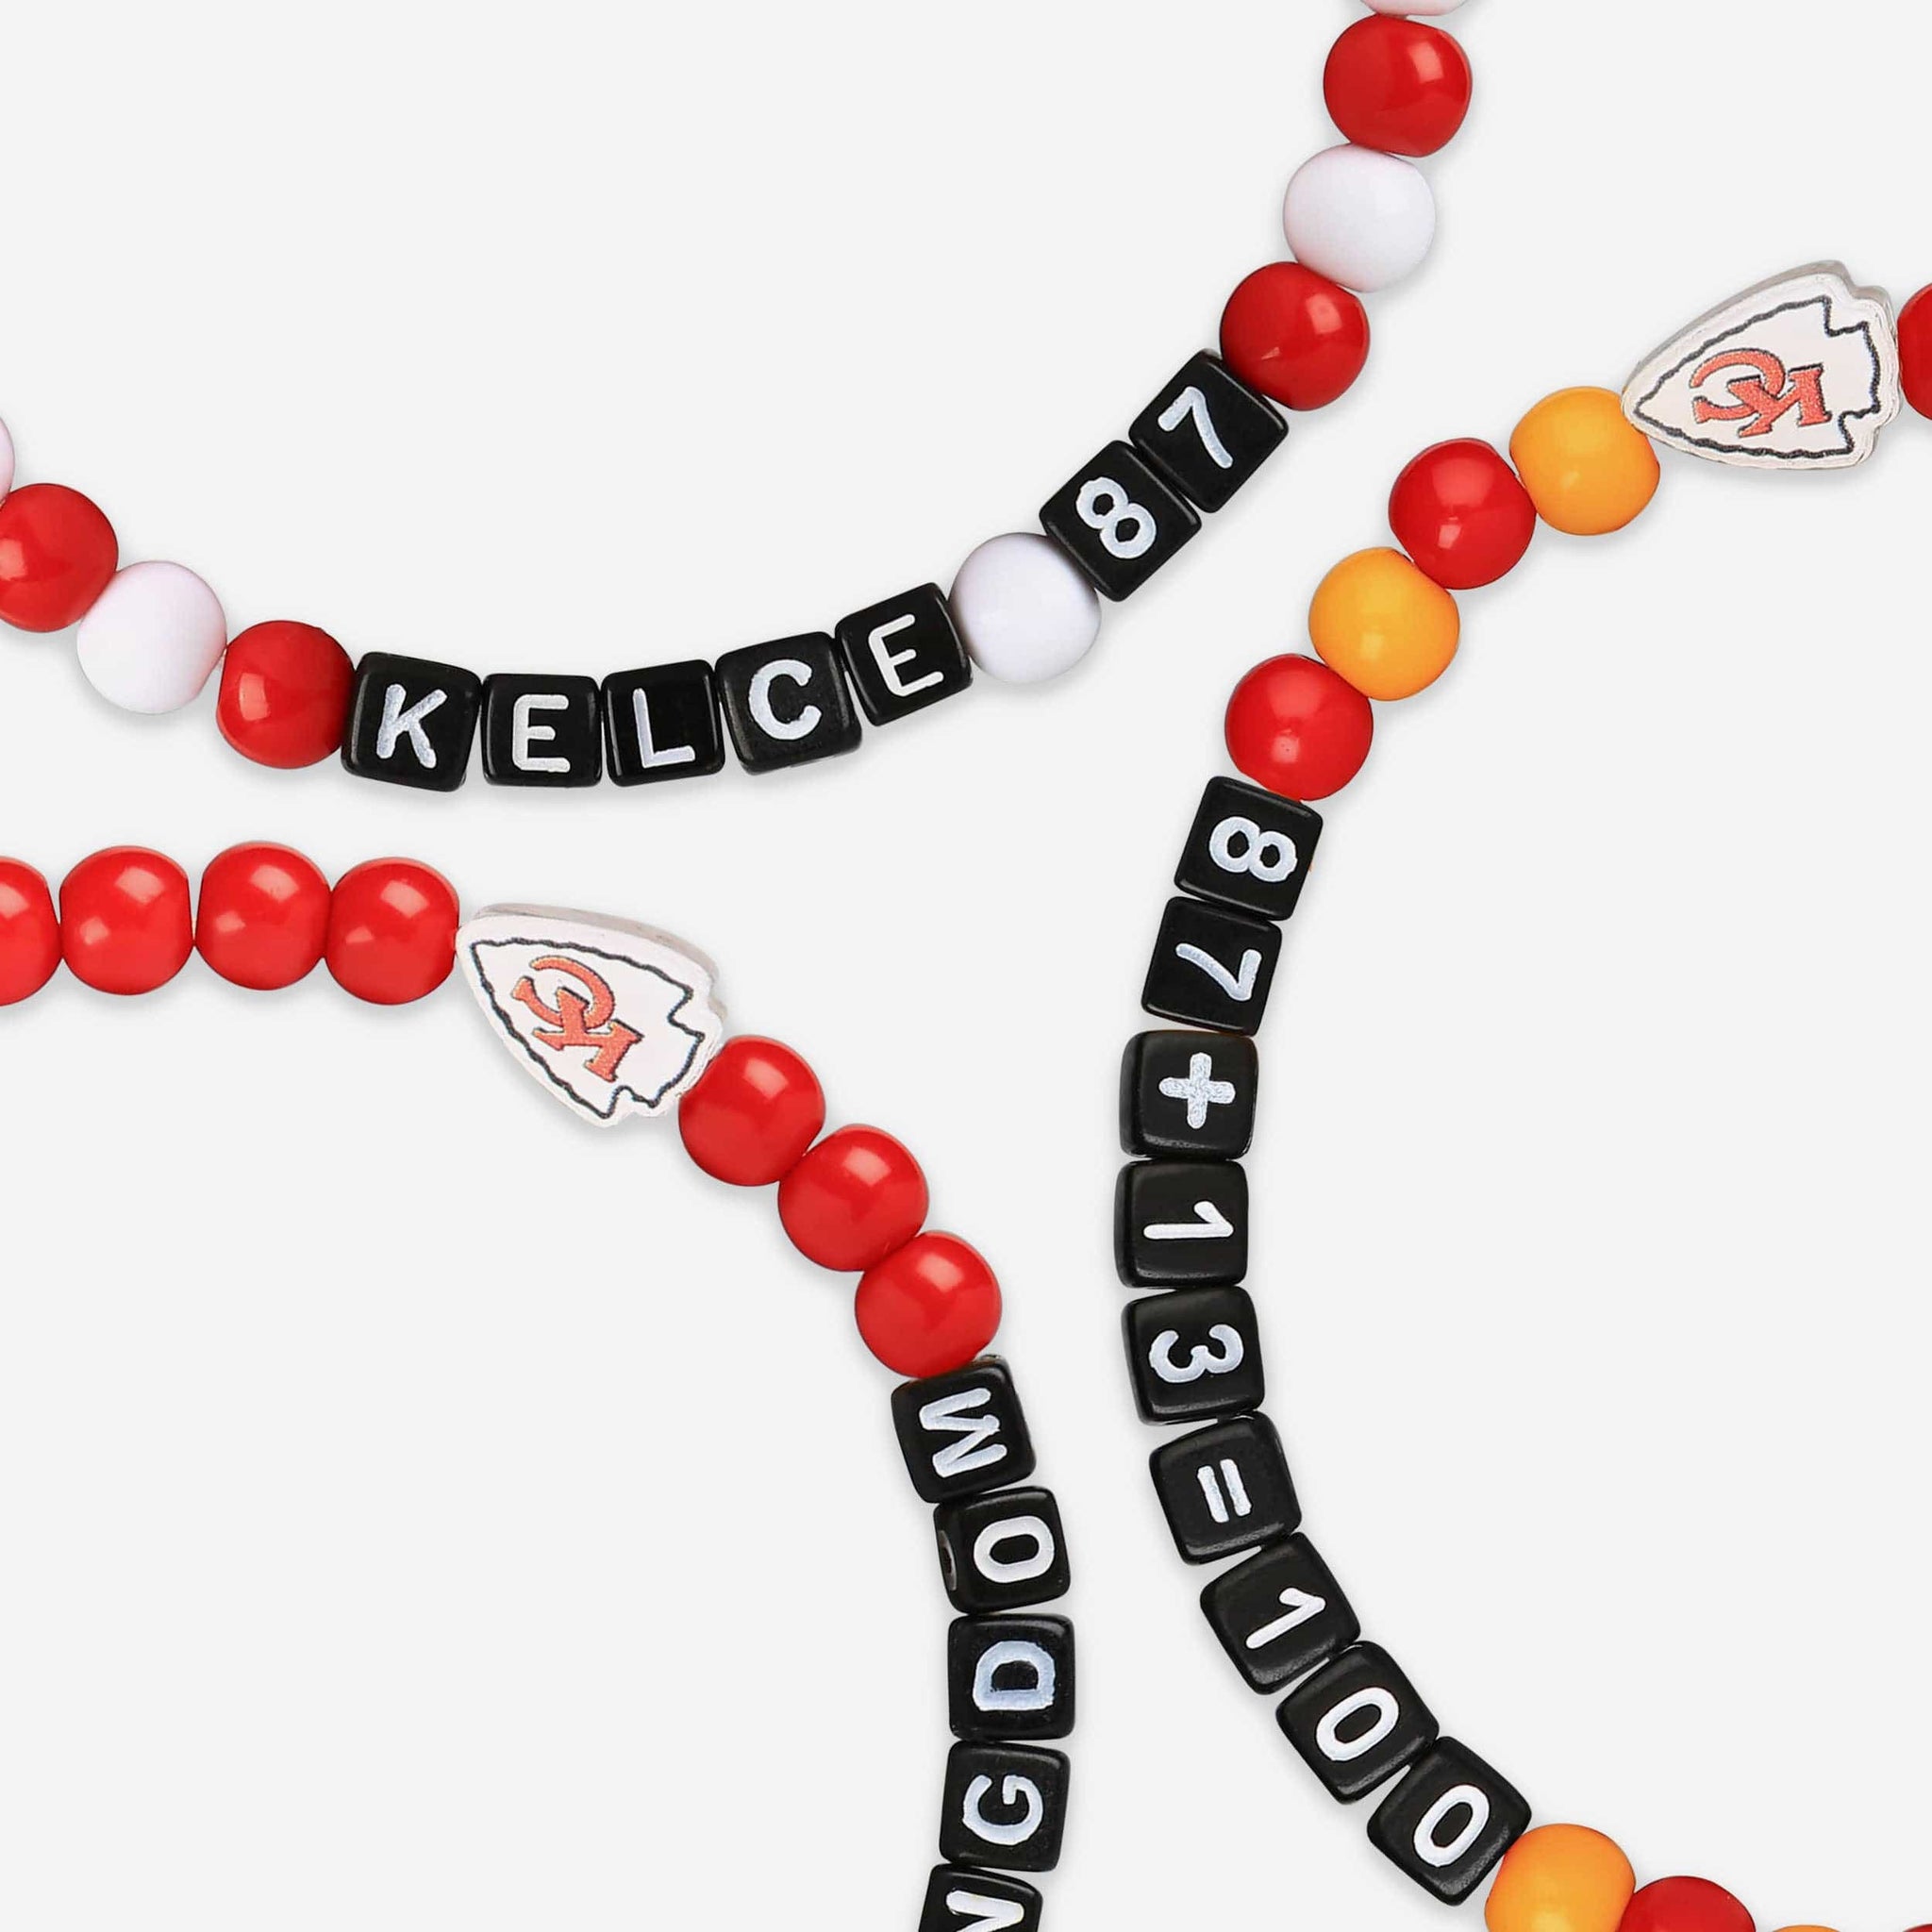 Travis Kelce and the Chiefs join in on friendship bracelet making